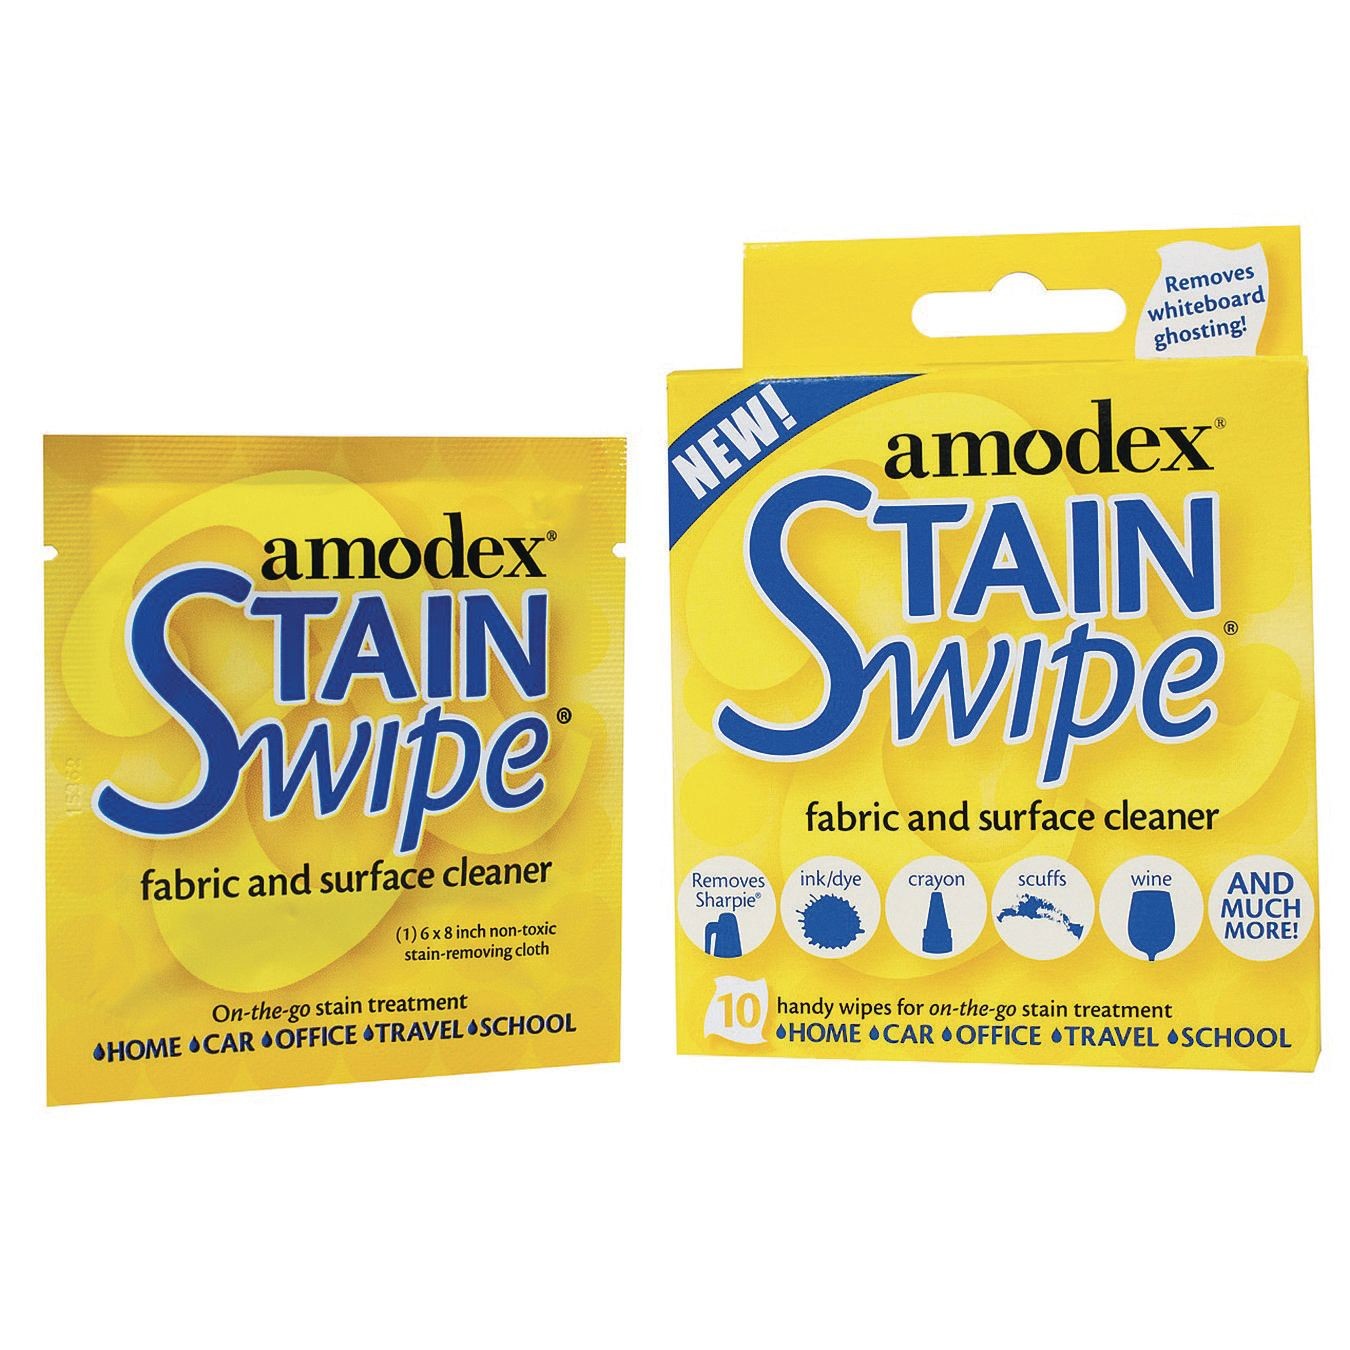 How To Remove Sharpie From Fabrics - Amodex Stain Remover